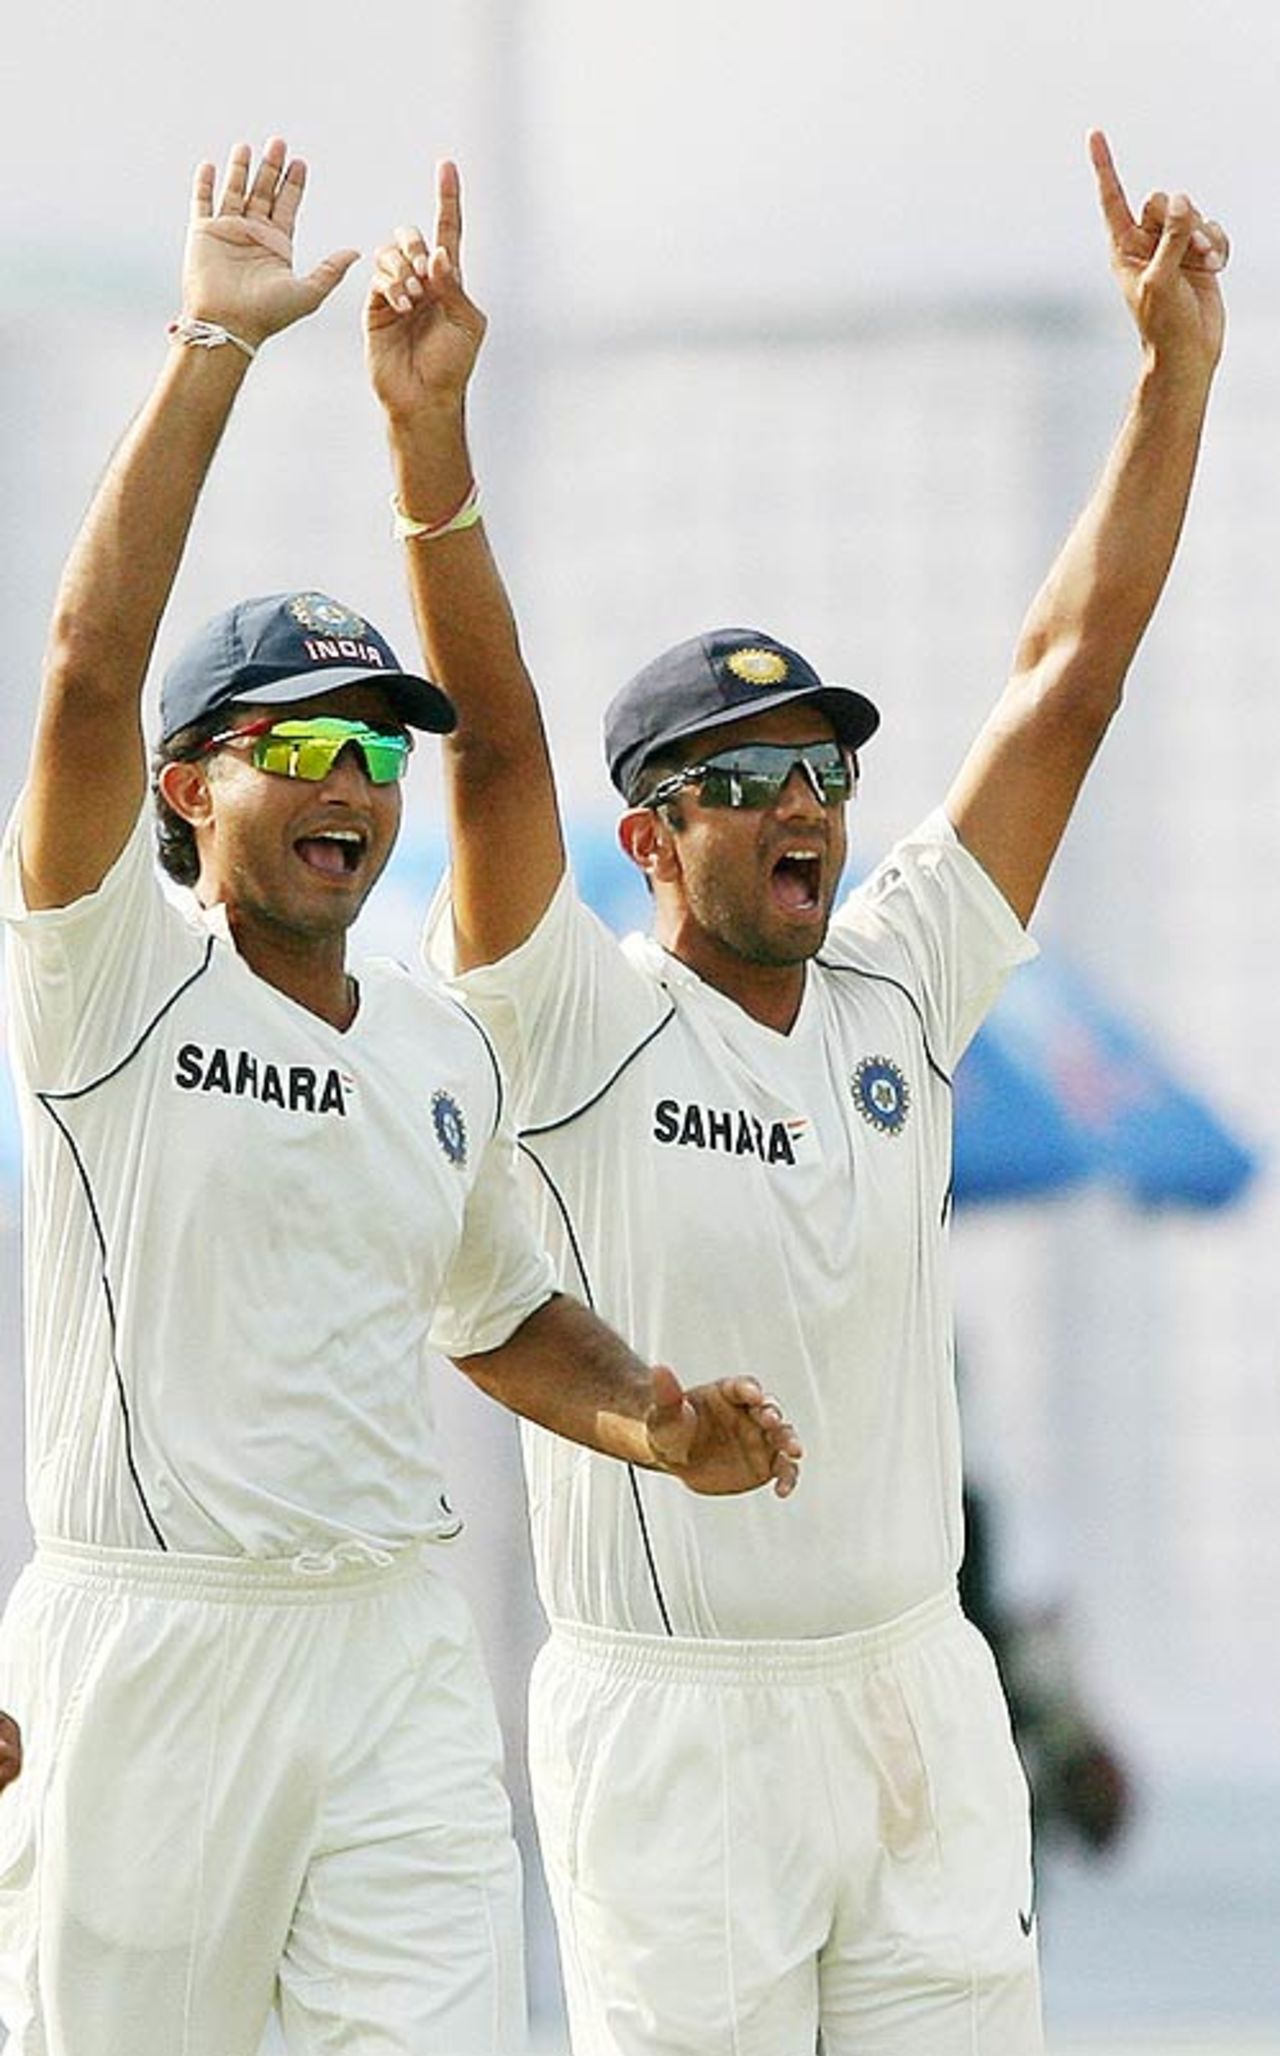 Sourav Ganguly and Rahul Dravid appeal for a wicket, Bangladesh v India, 2nd Test, Mirpur, 2nd day, May 26, 2007